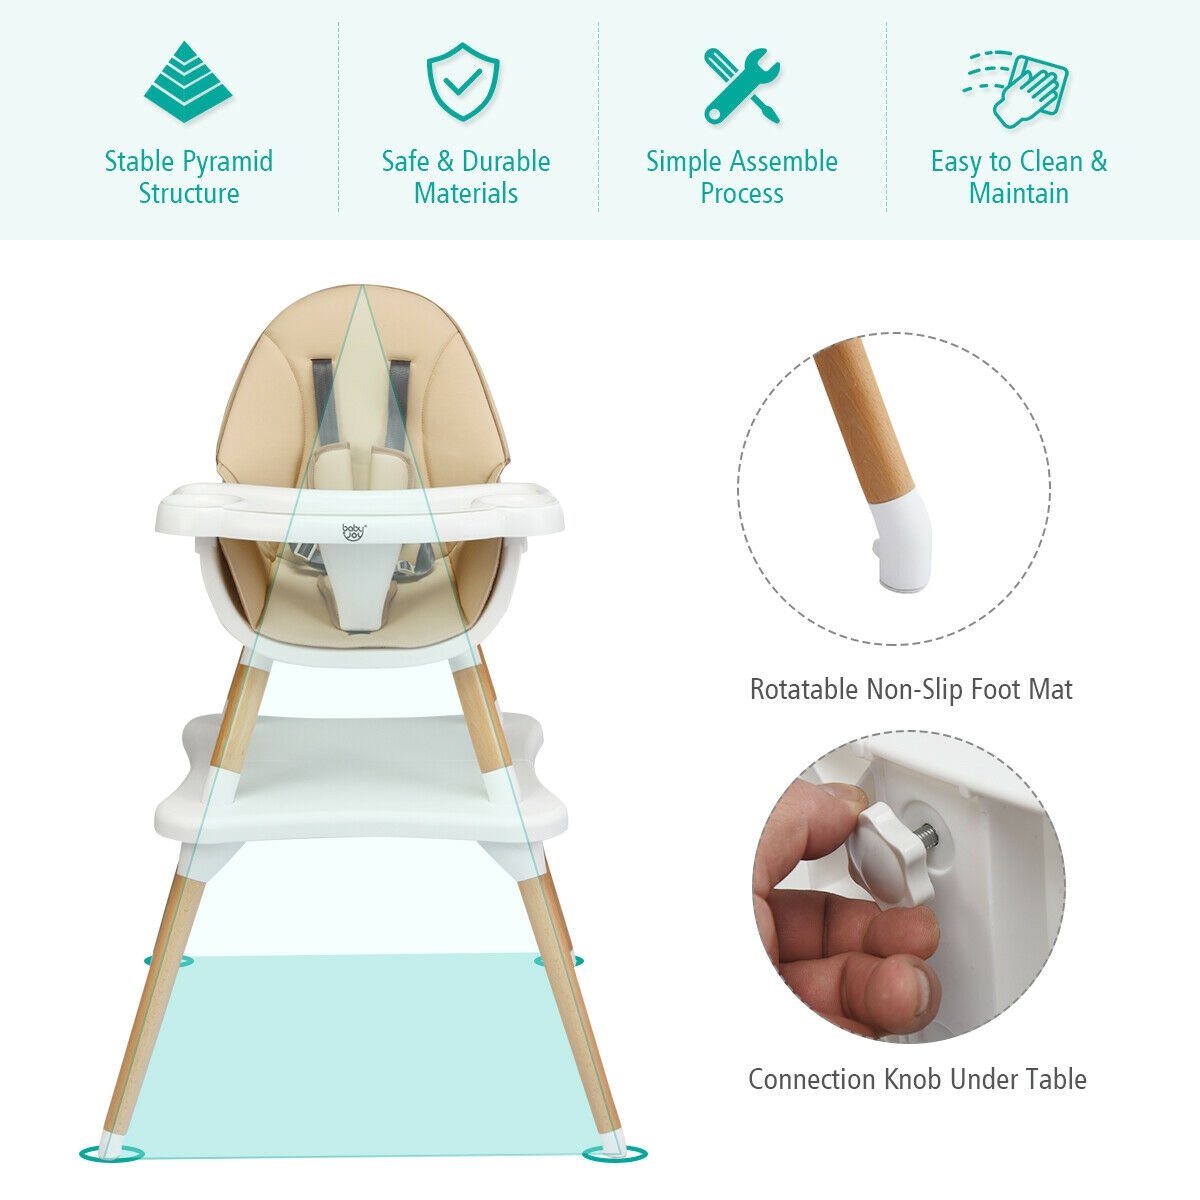 5-in-1 Baby Wooden Convertible High Chair , Beige at Gallery Canada